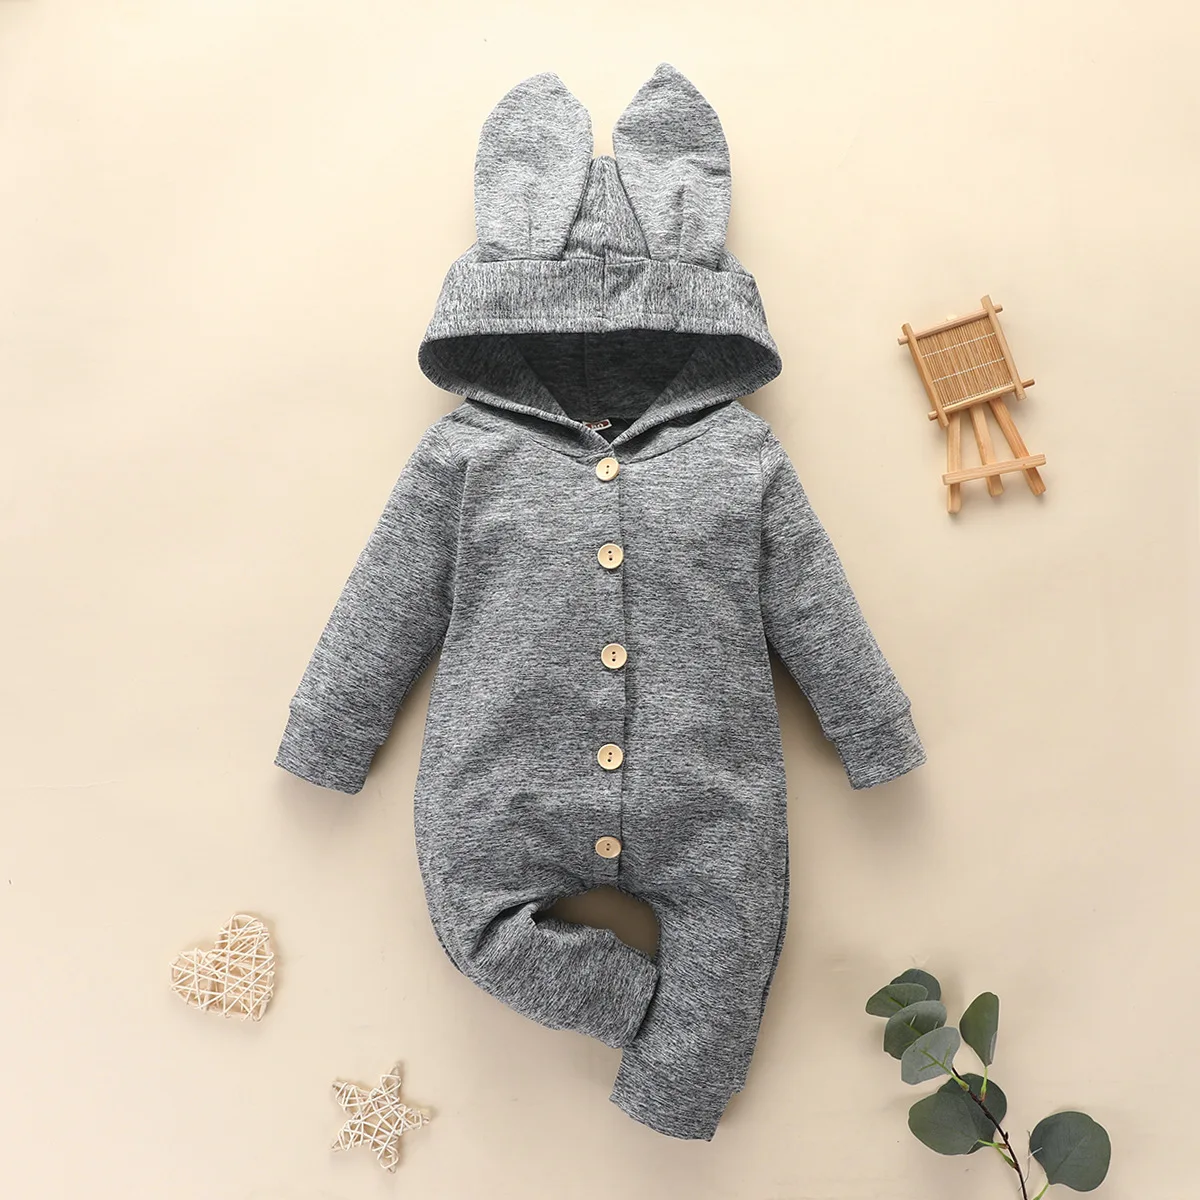 Cute printed Hooded Baby's Rompers Winter Jumpsuit For Kids Newborn Baby  Boy Clothes Fox Baby Overalls Crawlers for kids - AliExpress